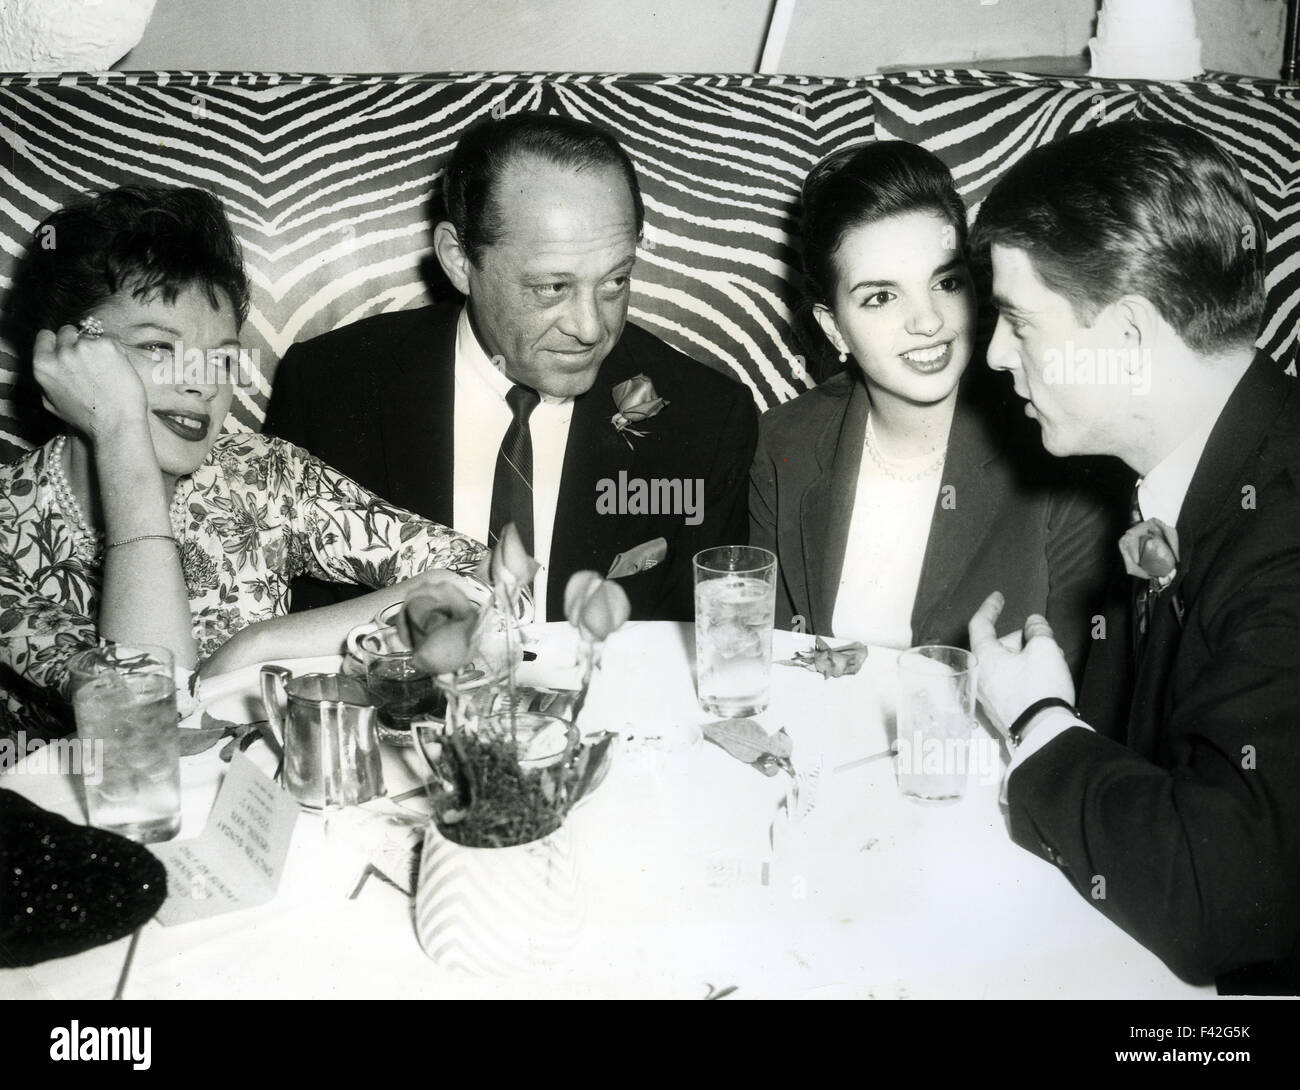 JUDY GARLAND at left with husband Sid Luff at the El Morroco restaurant, New York, in April 1963 celebrating daughter Liza Minnelli's stage debut in Best Foot Forward at the off-Broadway theatre Stage 73. Liza is seated next to dancer Tracy Everett who appeared on several of Judy Garland's TV shows. Stock Photo